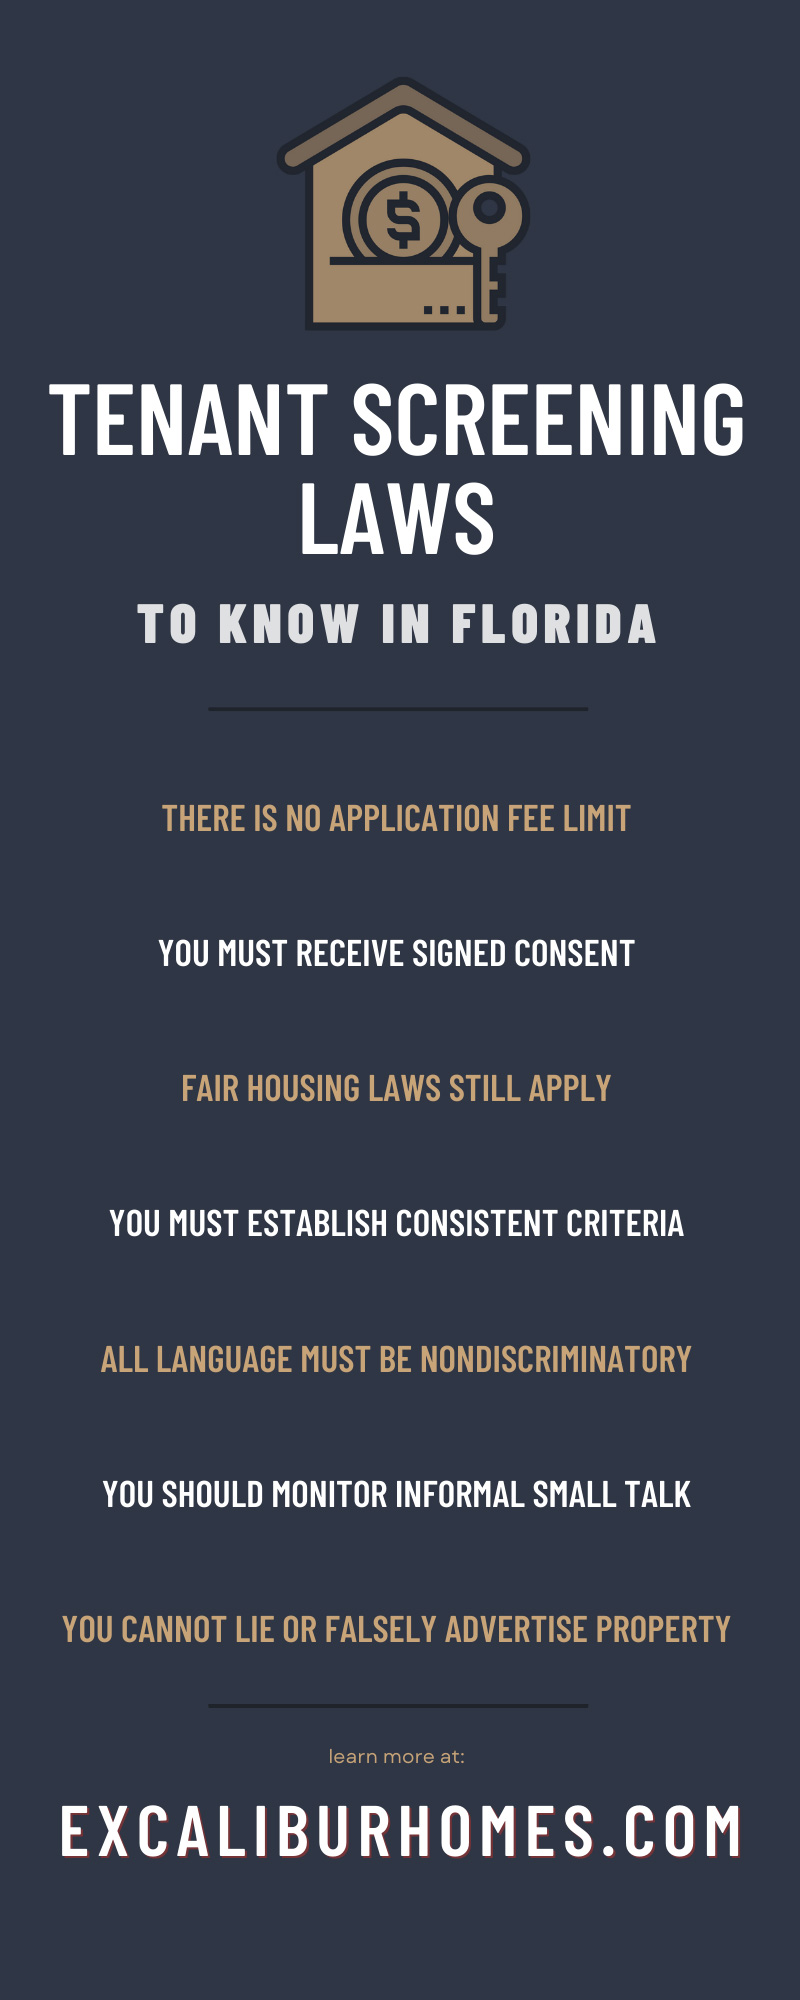 Tenant Screening Laws To Know in Florida
